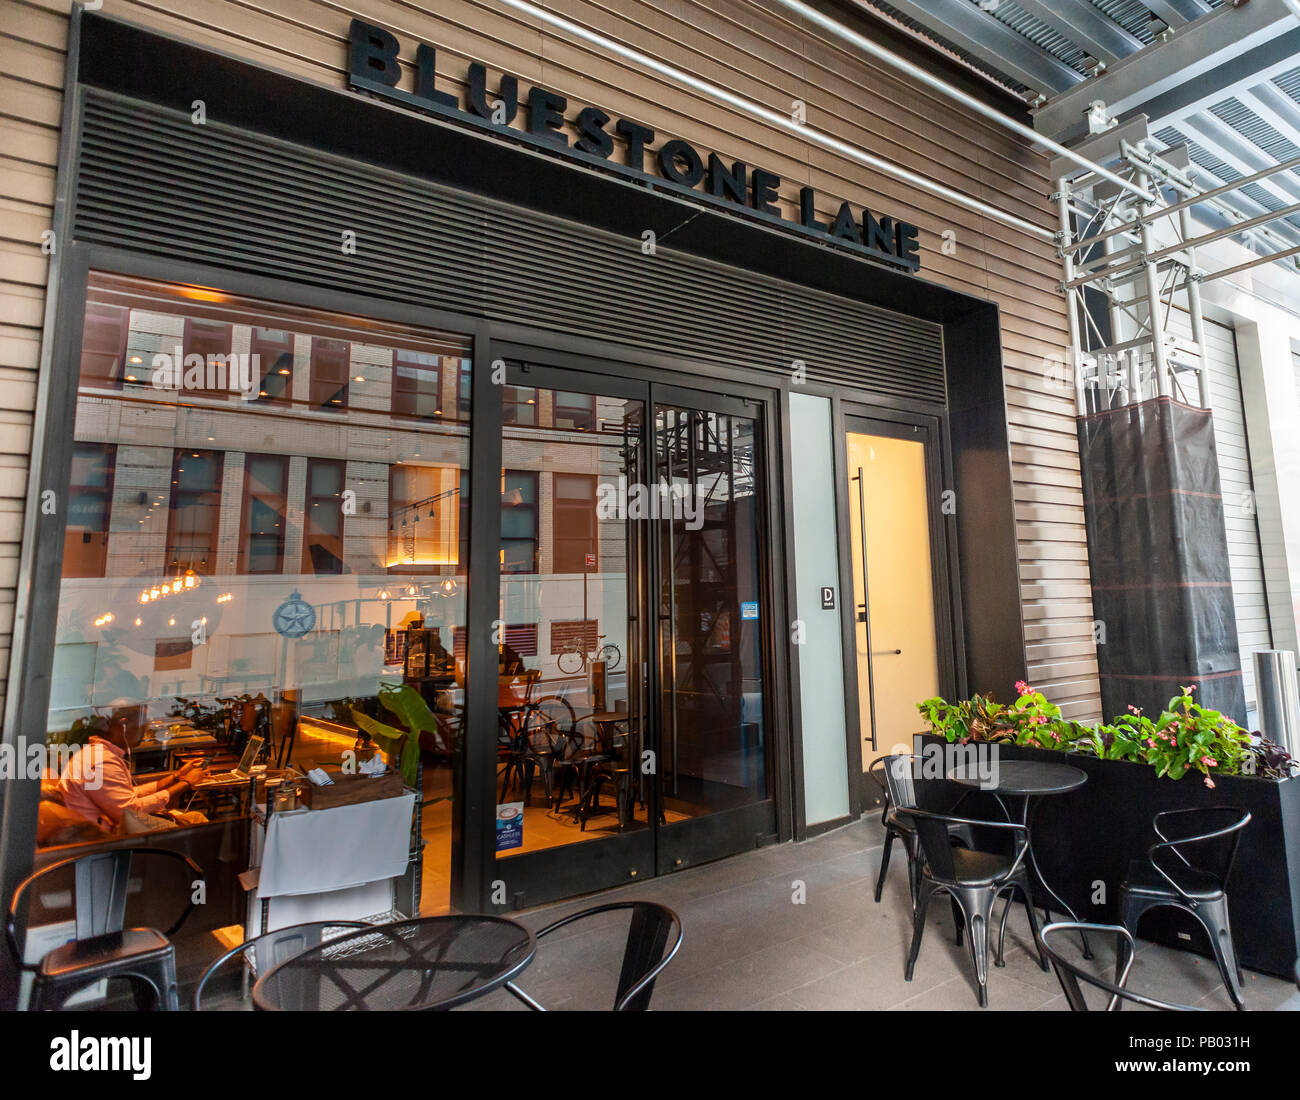 A Bluestone Lane cafe in New York on Wednesday, July 11, 2018. RSE Ventures  is reported to acquiring a minority stake in the 30 store Australian coffee  chain which is undertaking an